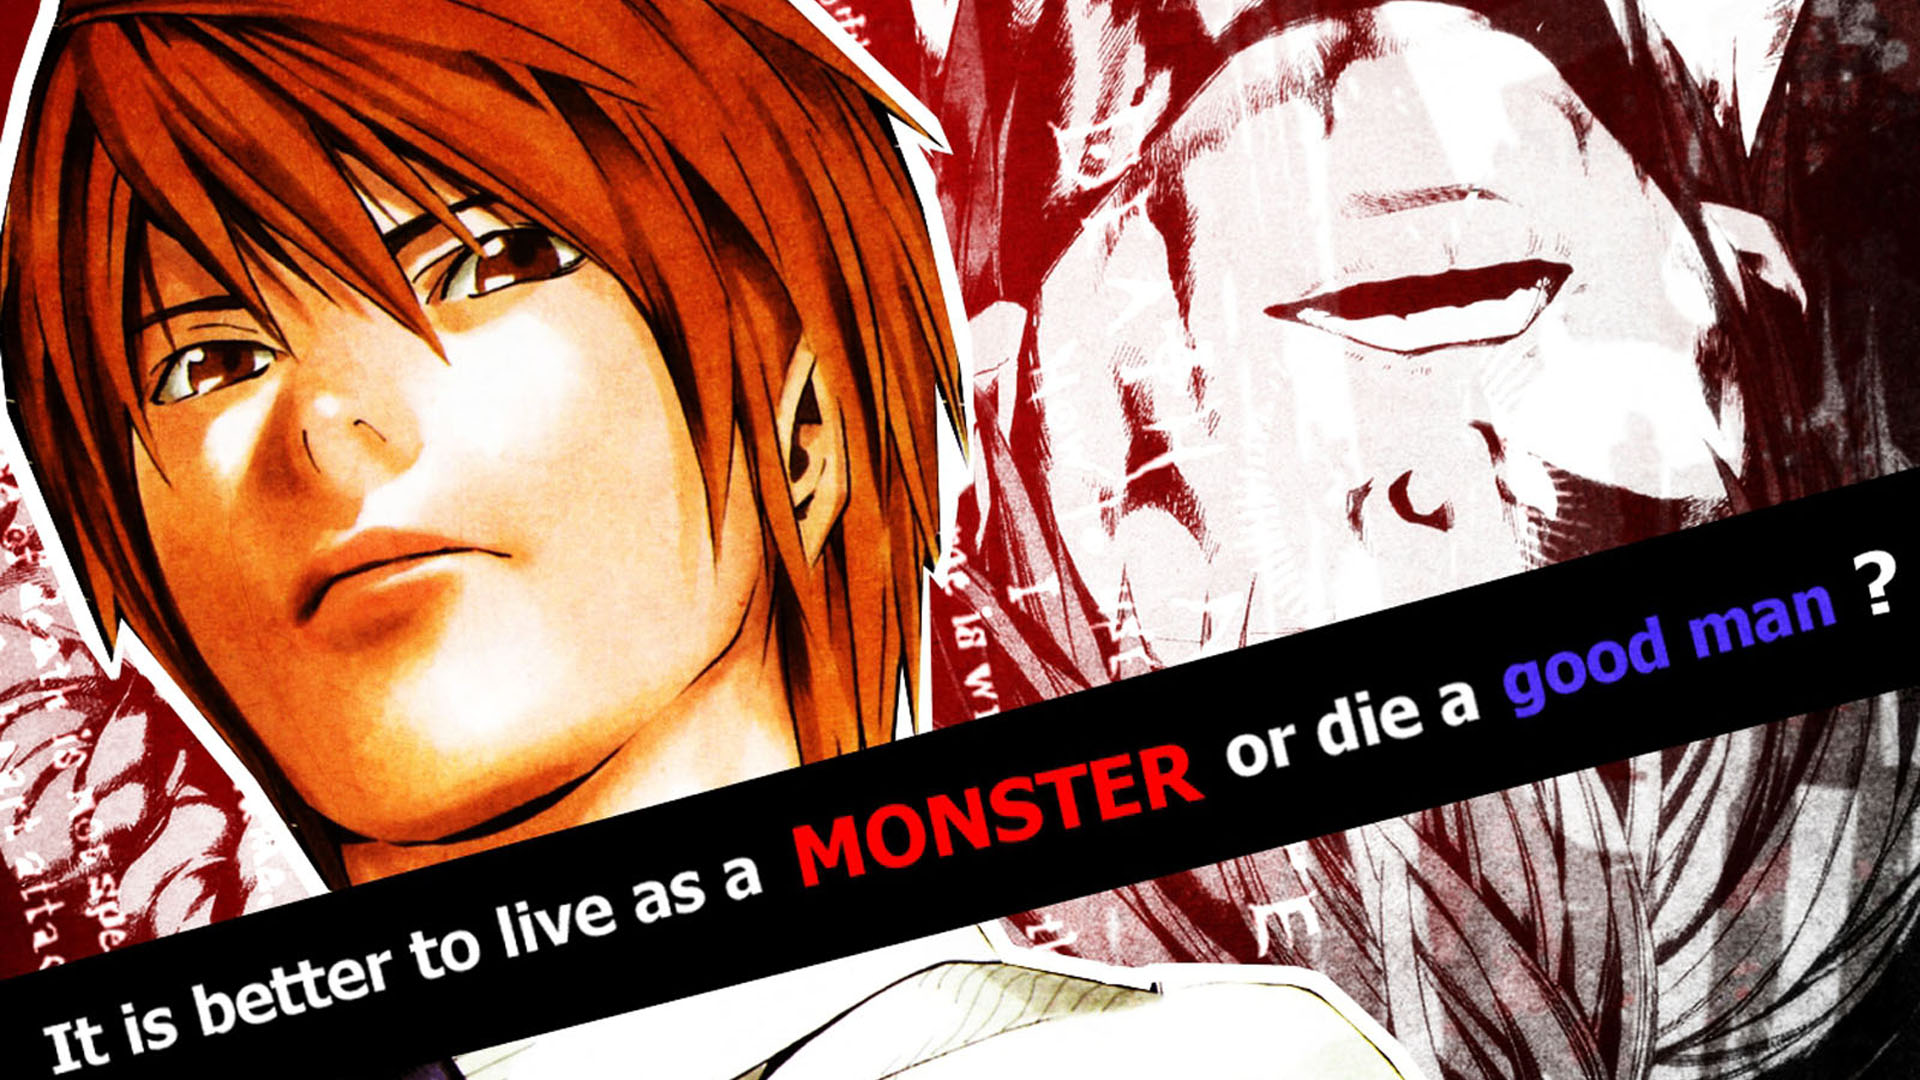 Light Yagami Wallpaper 1920x1080 Wallpapers 1920x1080 Wallpapers